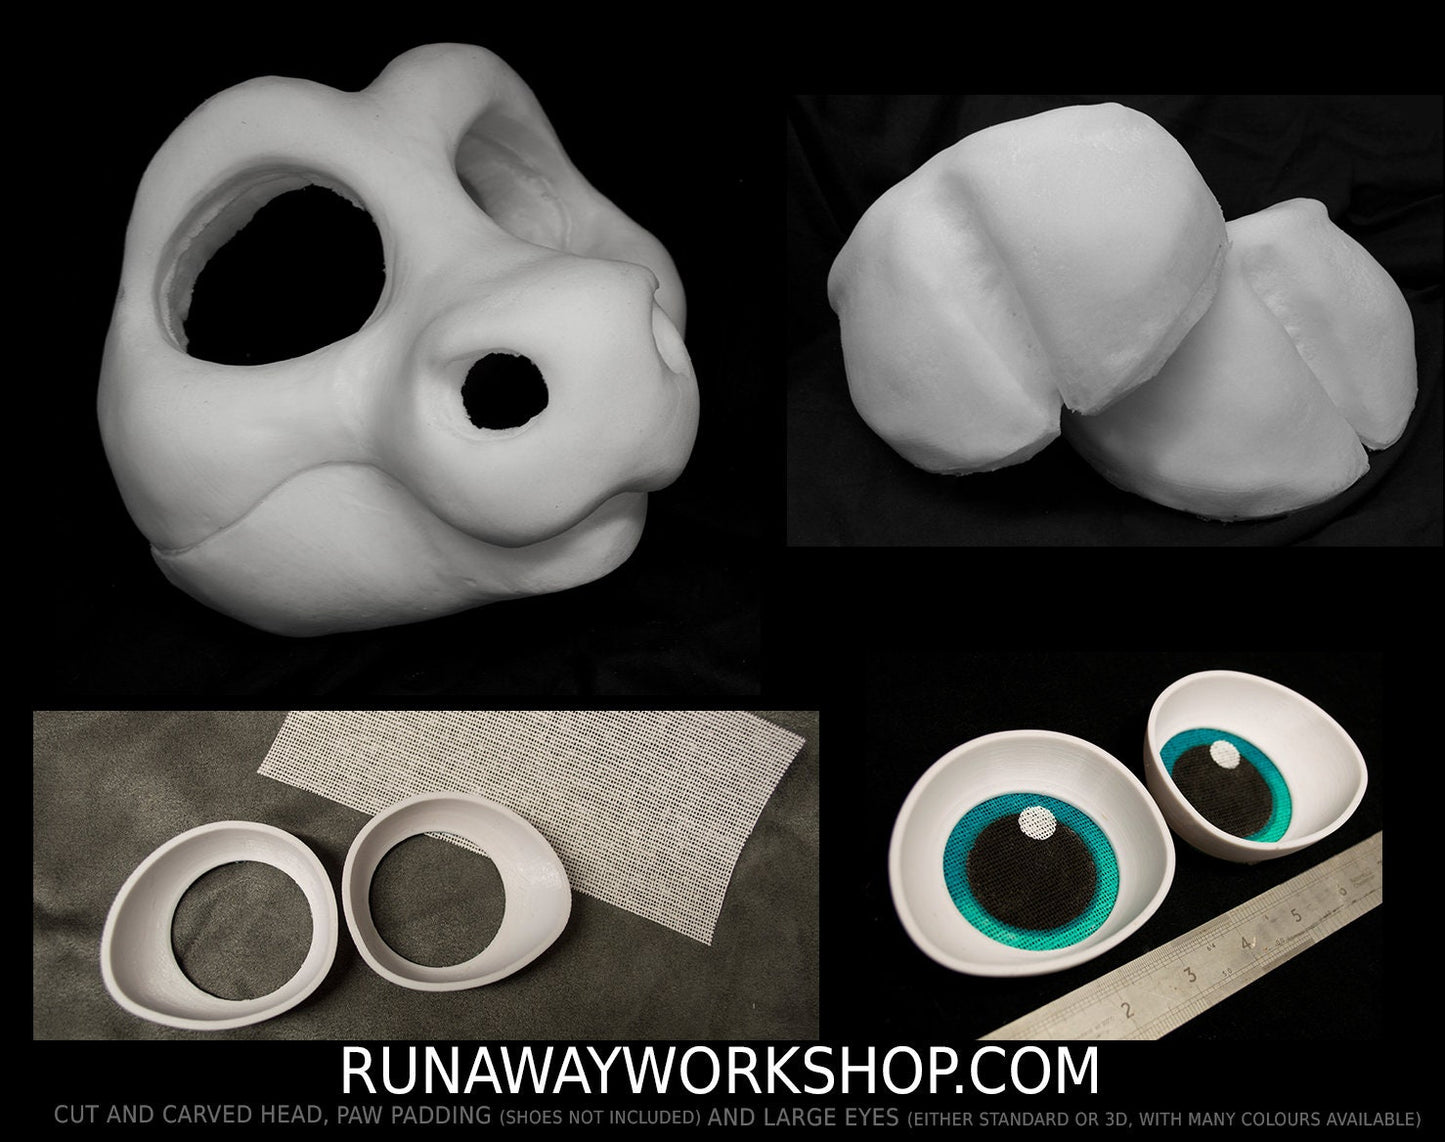 Kemono deer bundle deal: cut and carved head base, Eyes and Feet padding, for costumes mascots and fursuits.